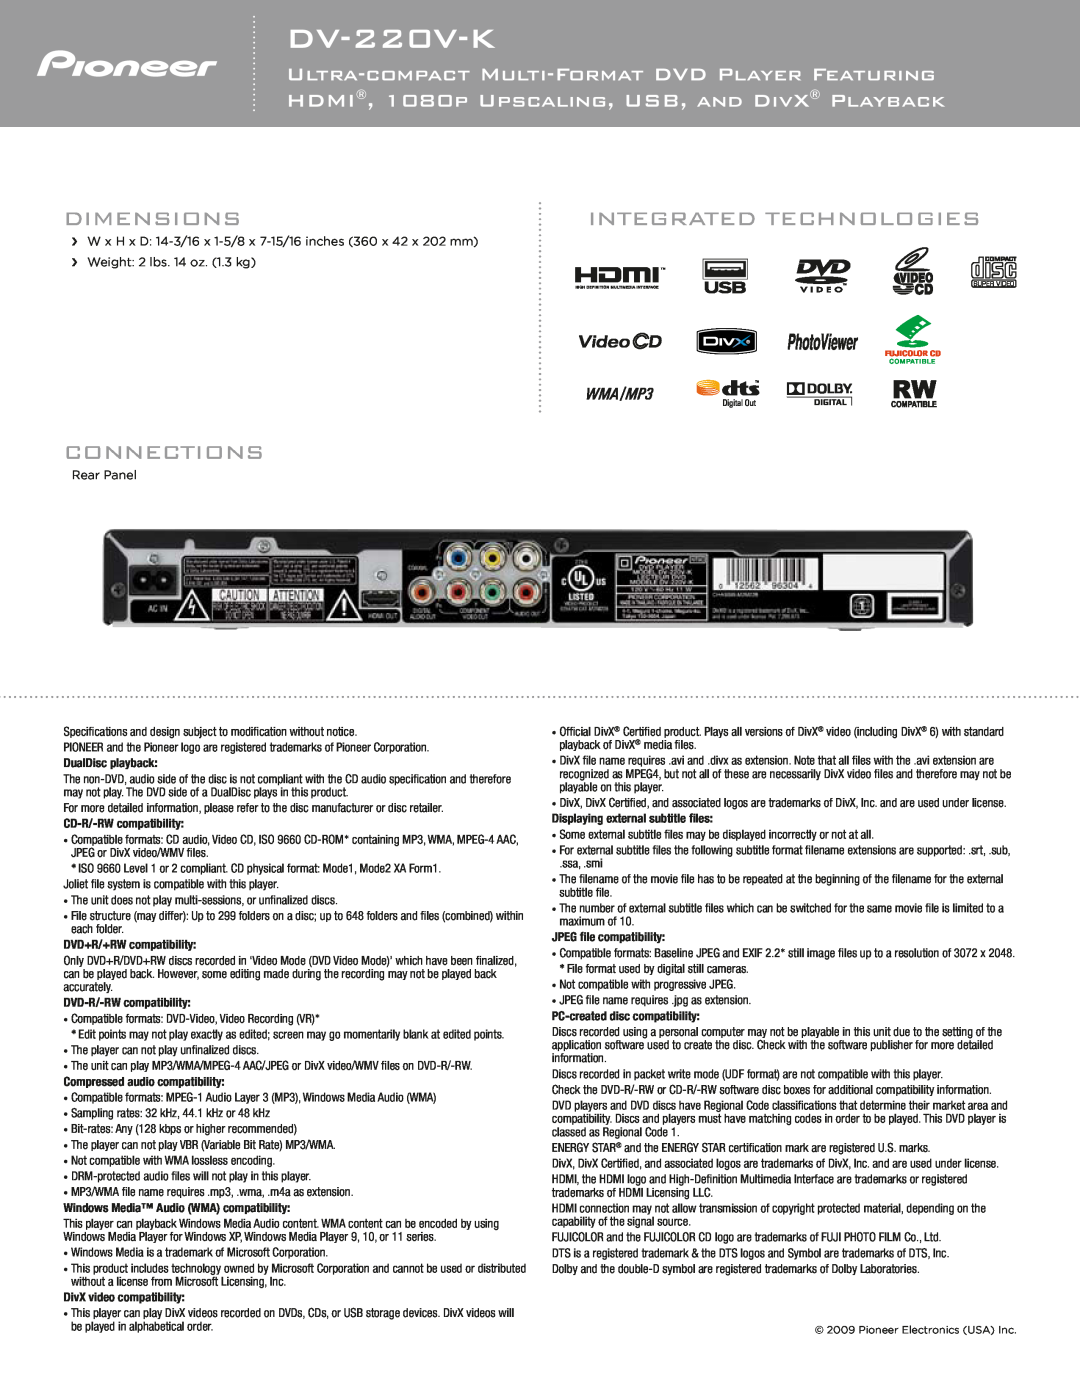 Pioneer DV-220V-K specifications Dimensions, Connections, Integrated Technologies 